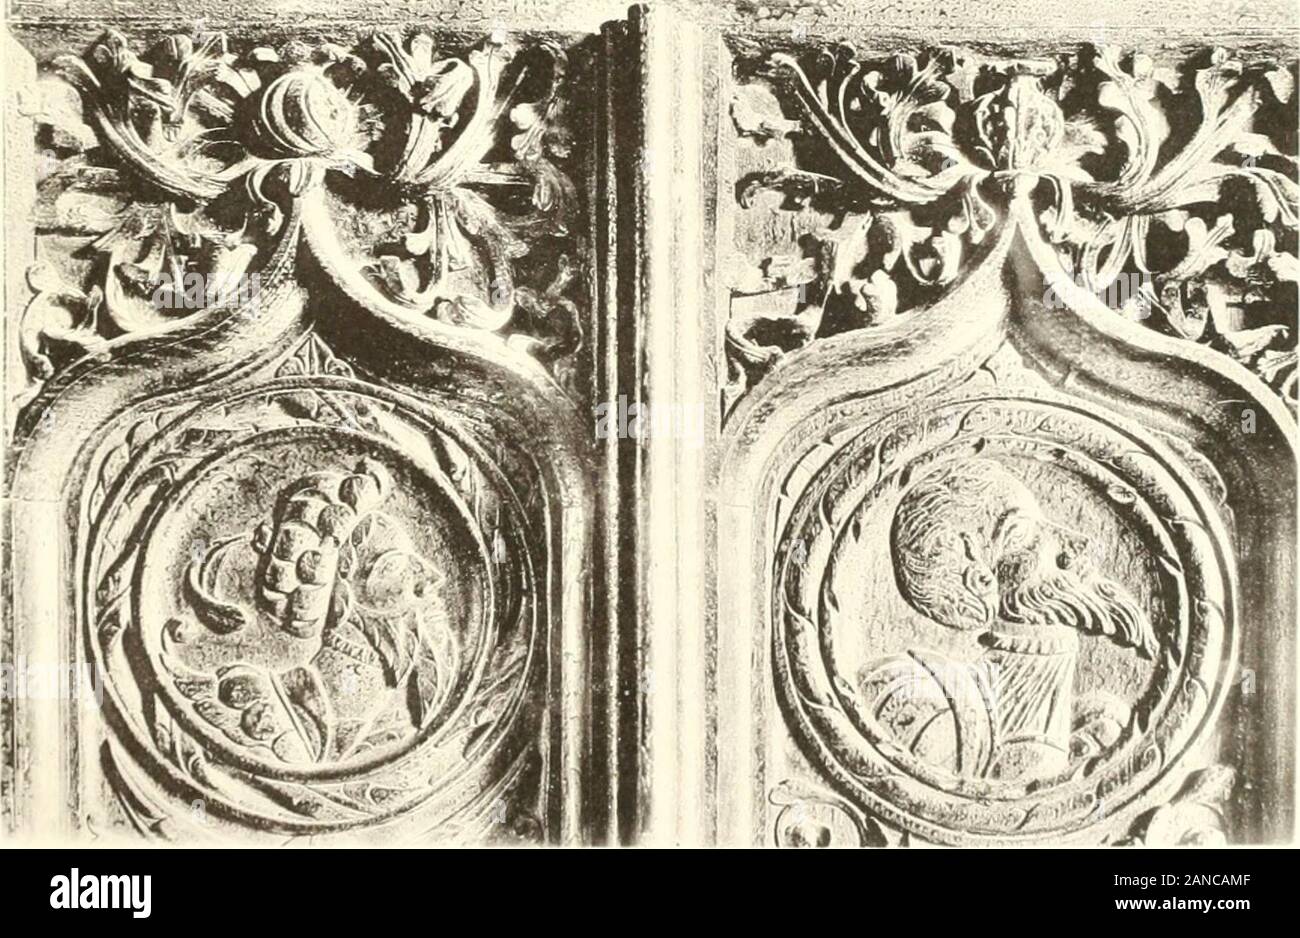 Roodscreens and roodlofts . (A) Parclose : Colebrook (B) Pulpit : Kingsbbidge. (C) Screen Panels : Warklbigh APPENDIX II 415 (o) Roodscreetts (continued) —R.S. now south pax- Stamford (St. John close ; painted).Stamford (St. George), painted. „ (BrowTies Bede House Chapel ; very rich screen).Sti.xwood (part of an old screen (fine). [ seats).Stow (St. ^lary ; parts, good Perp. in chancelSwATON (part, very fine, now a parclose).SWINESHE.D (fine).Tallington (R.S., now in tower).Theddlethorpe (early Perp.).Thorpe (St. Peter ; Perp.).Thurlby-bv-New^ark.Torrington, West (circ. 1400, from St. Benedi Stock Photo